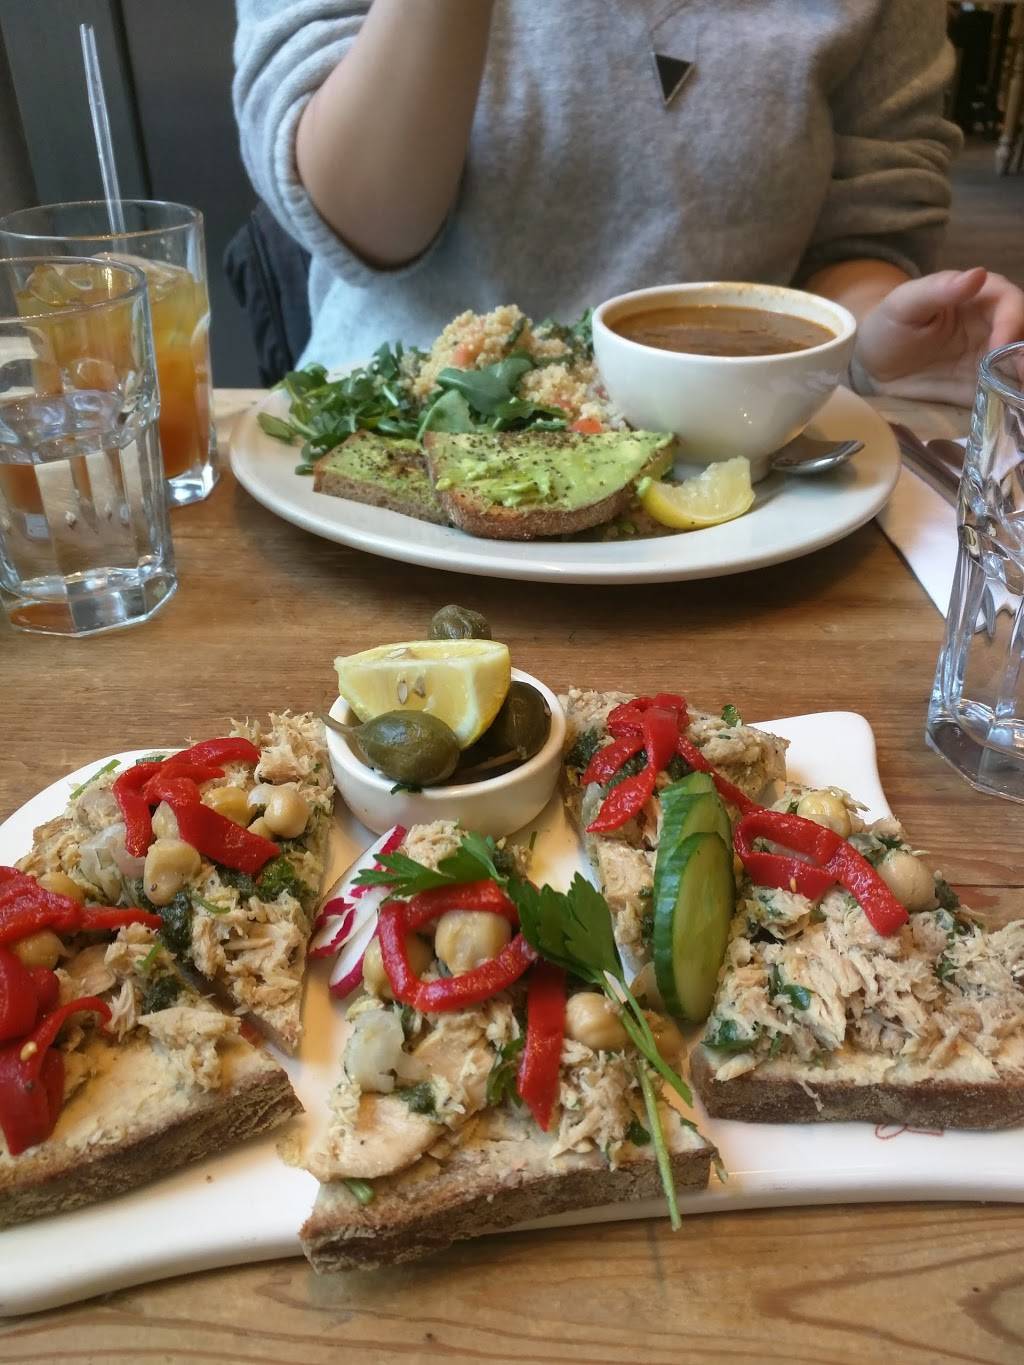 Le Pain Quotidien | restaurant | 3 Park Ave, New York, NY 10016, USA | 2127792905 OR +1 212-779-2905